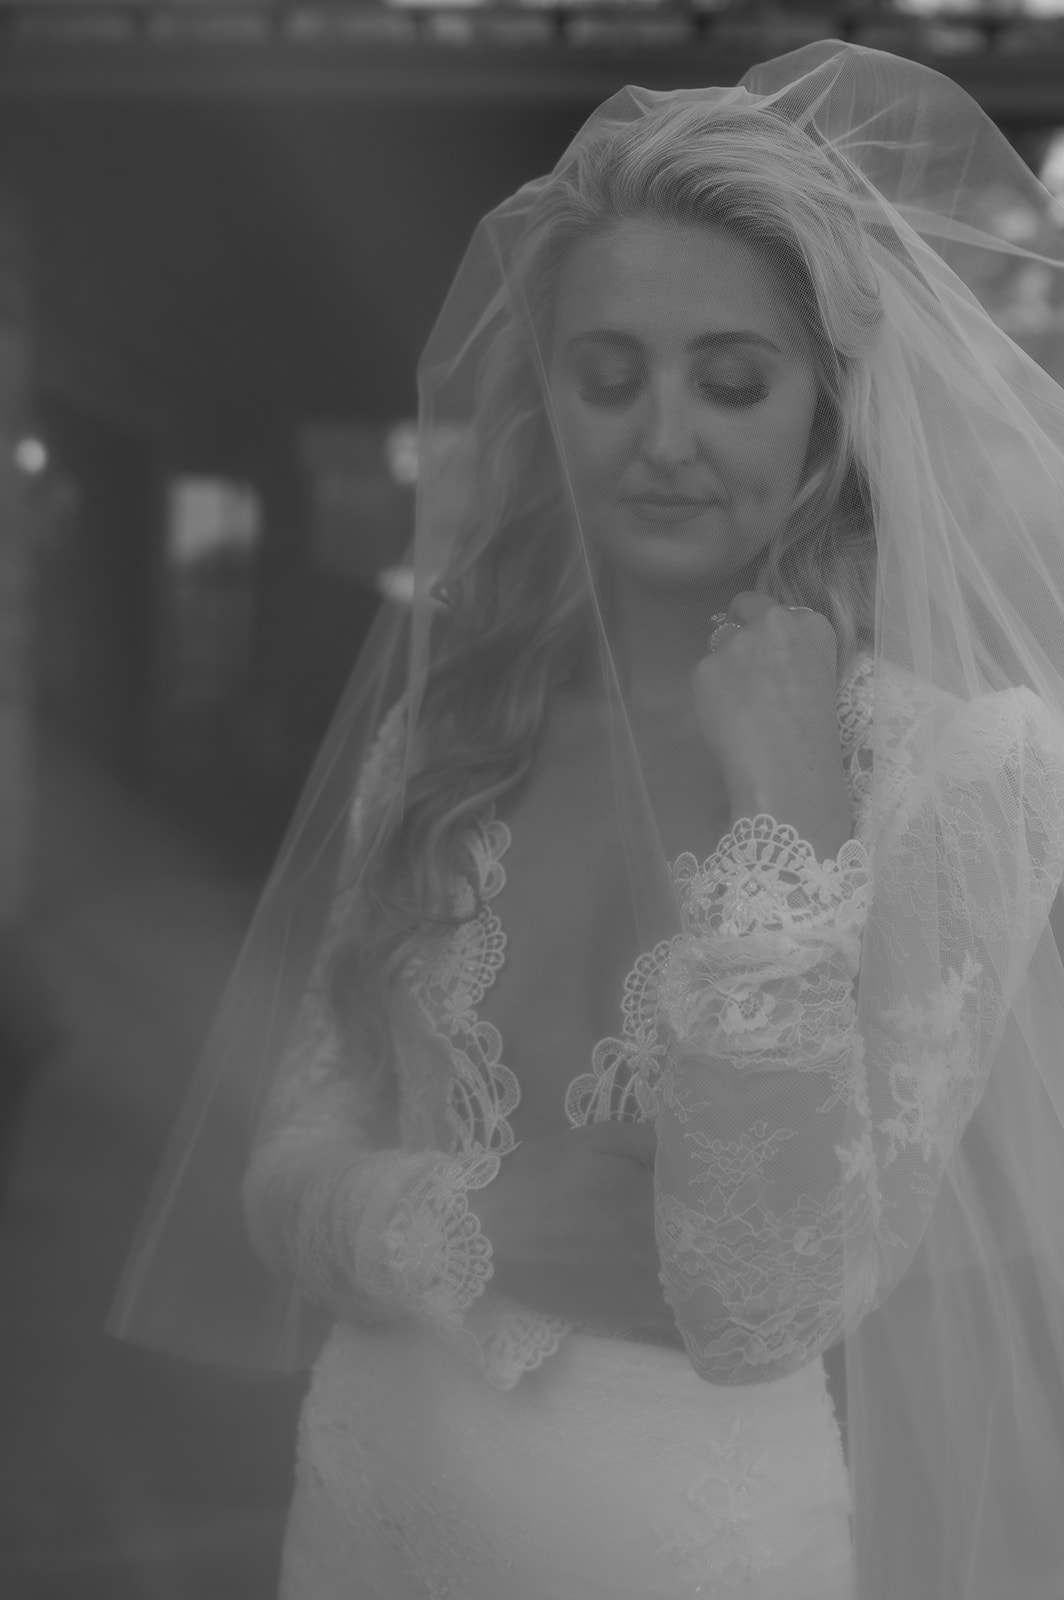 Artistic Black and White image of bride through her veil.